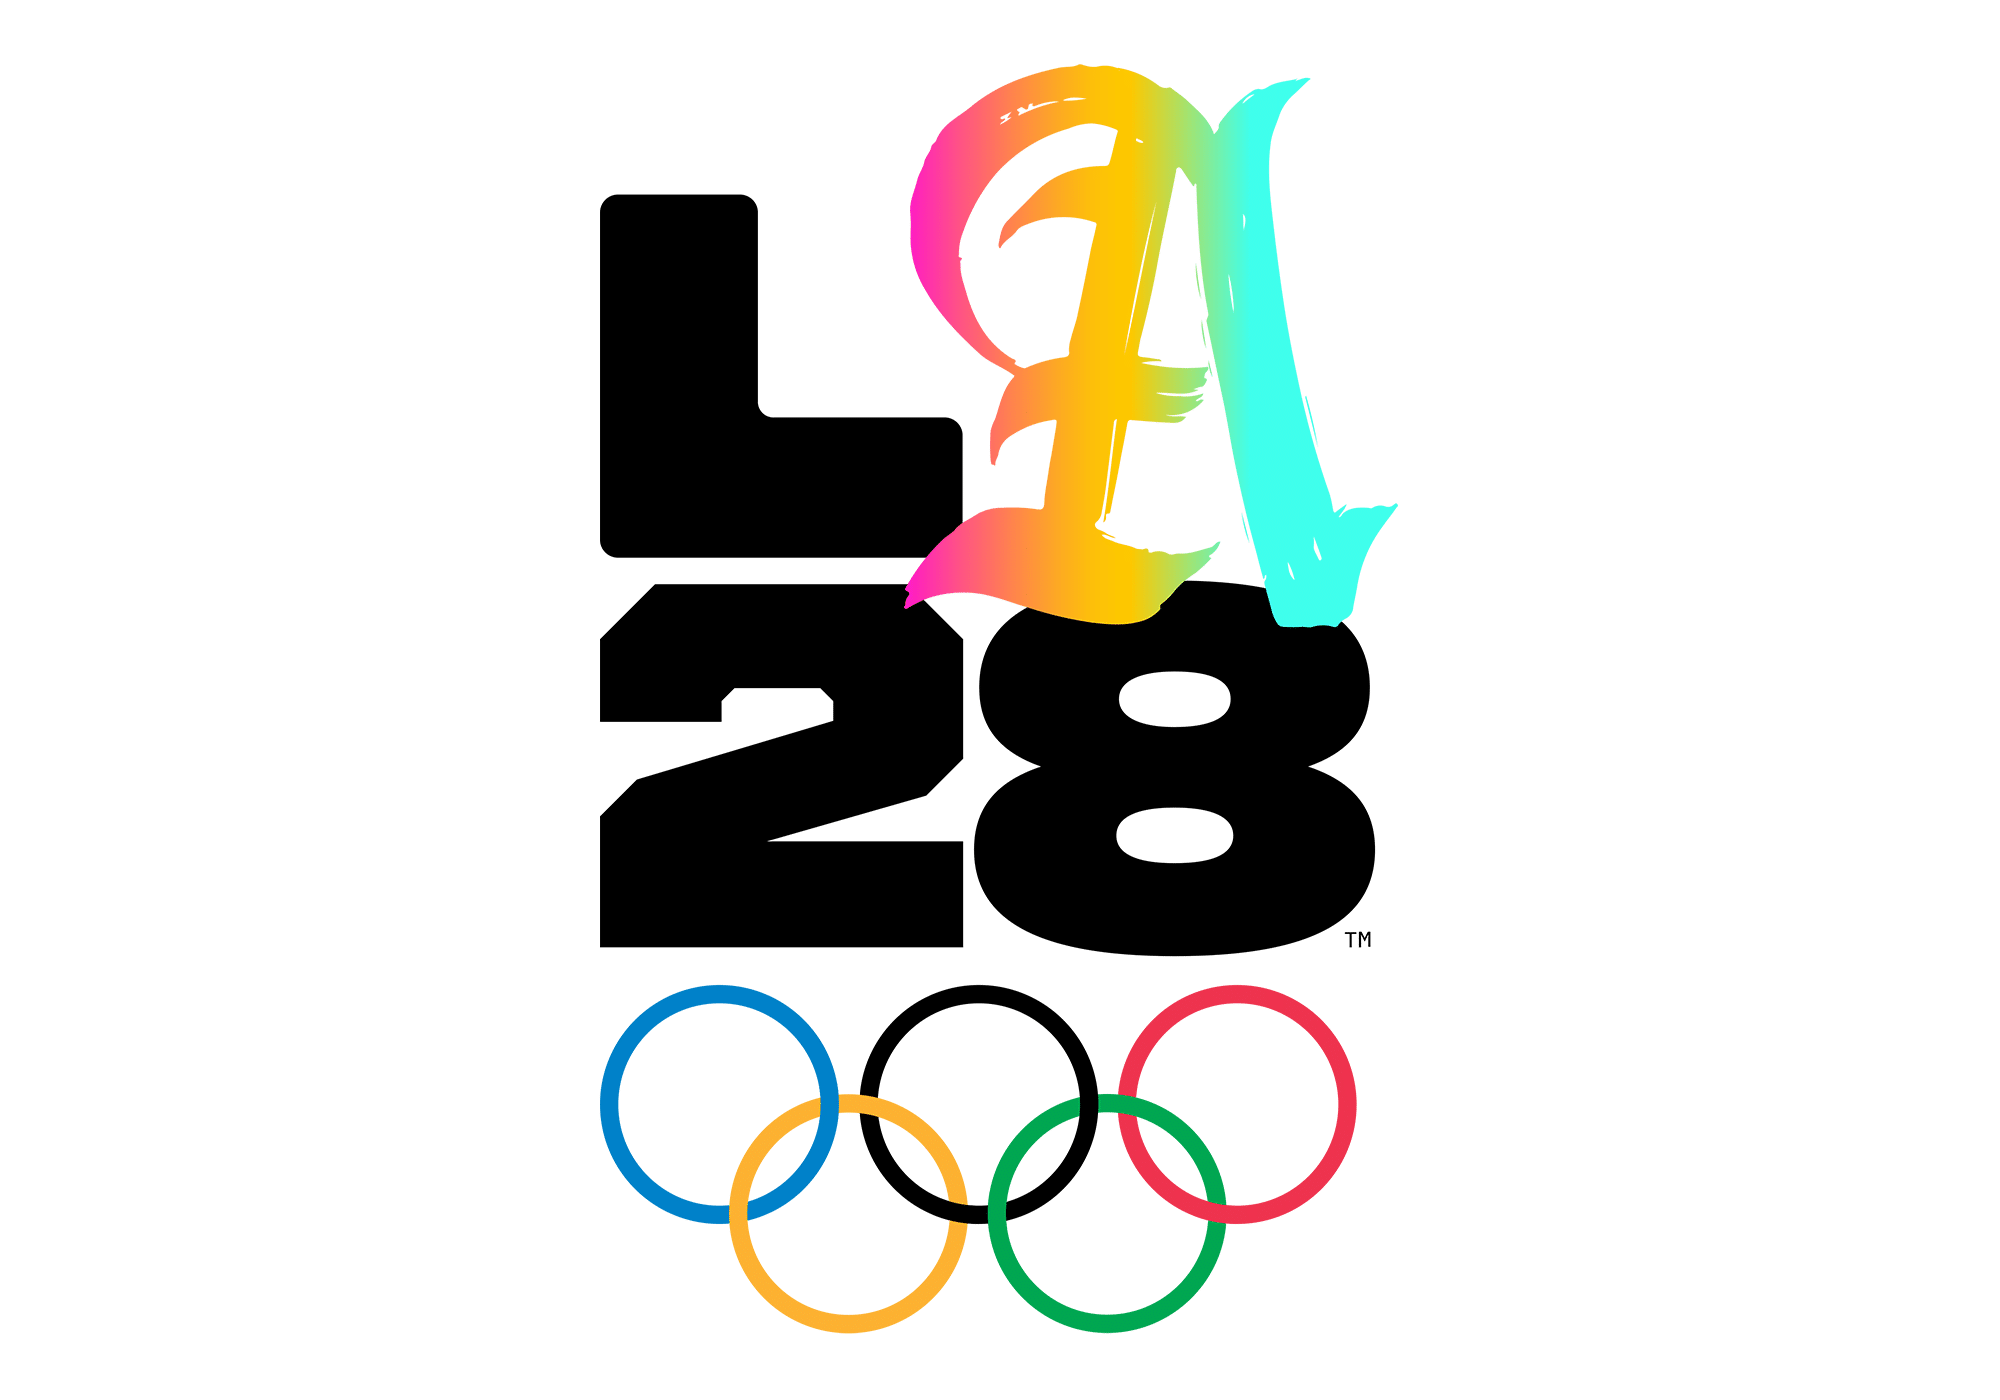 Los Angeles 2028 USA, Summer Olympics - Games of the XXXIV Olympiad